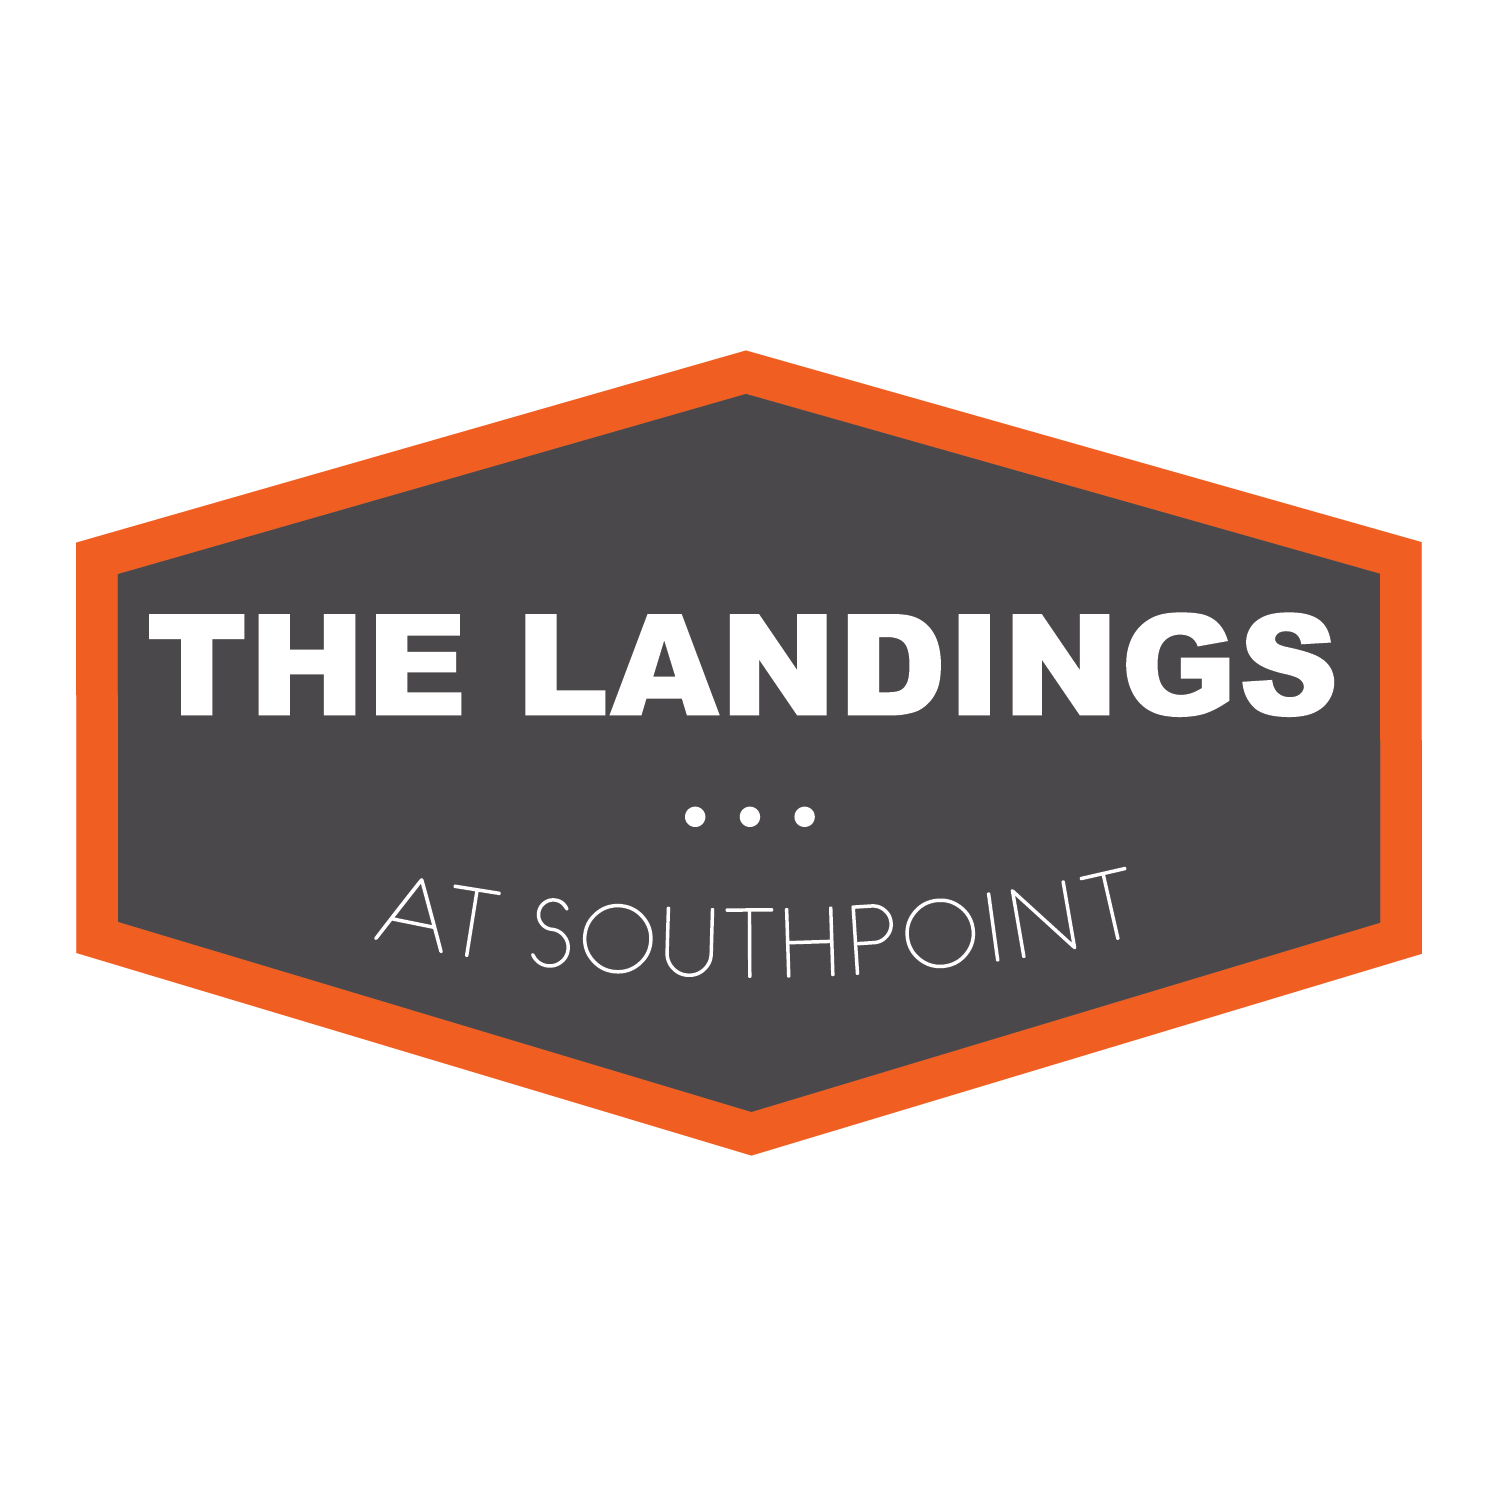  branding &amp; logo created for apartment complex the Landings at Southpoint 